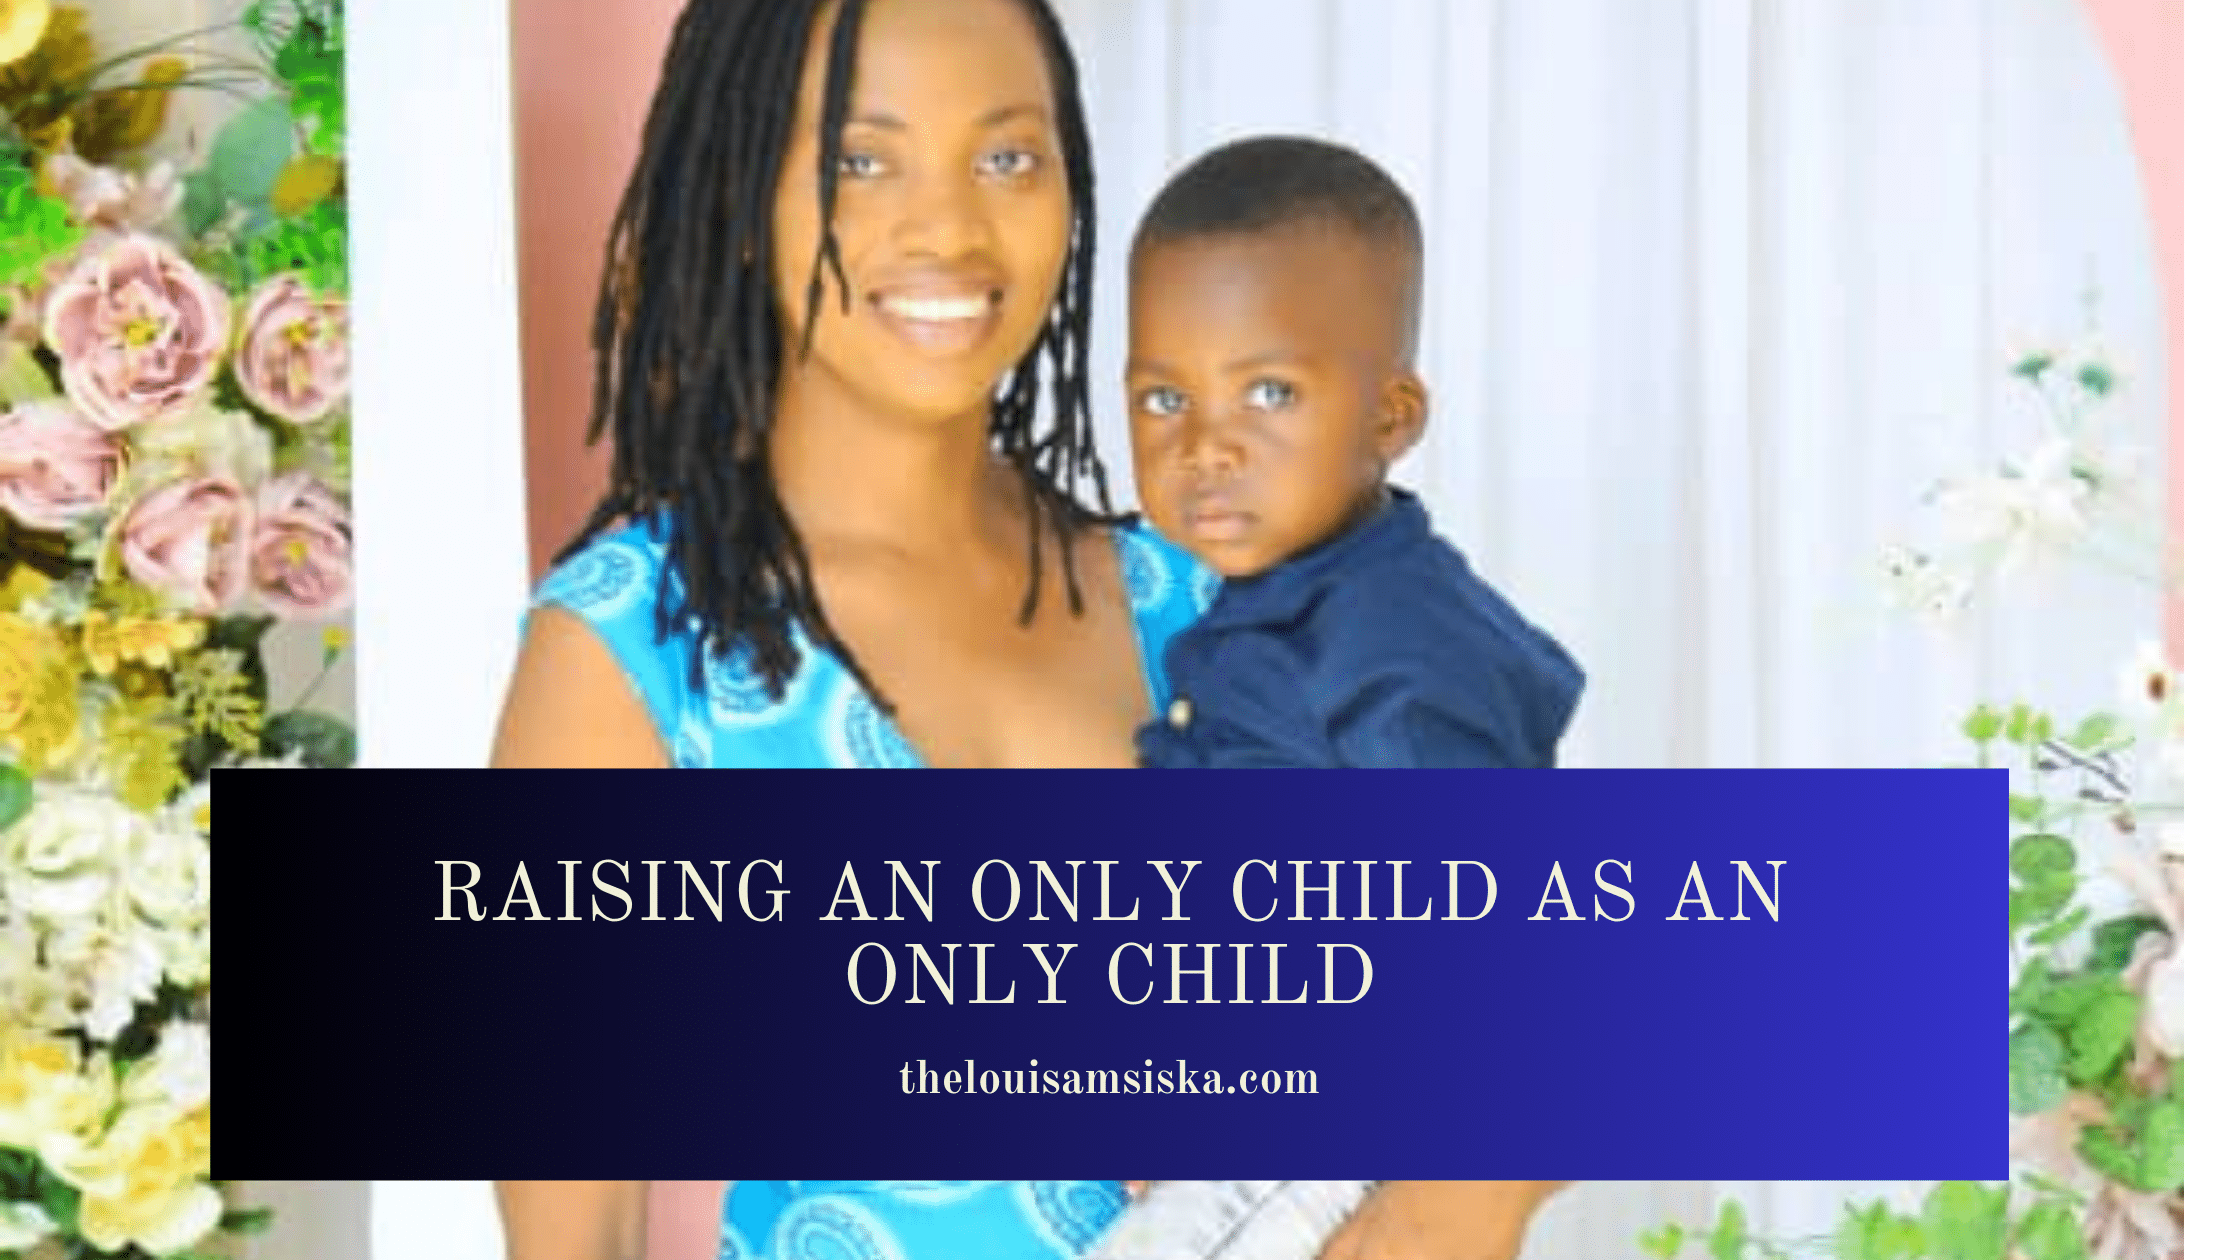 Banner for Raising an Only Child as an Only Child with Louisa Msiska holding her son